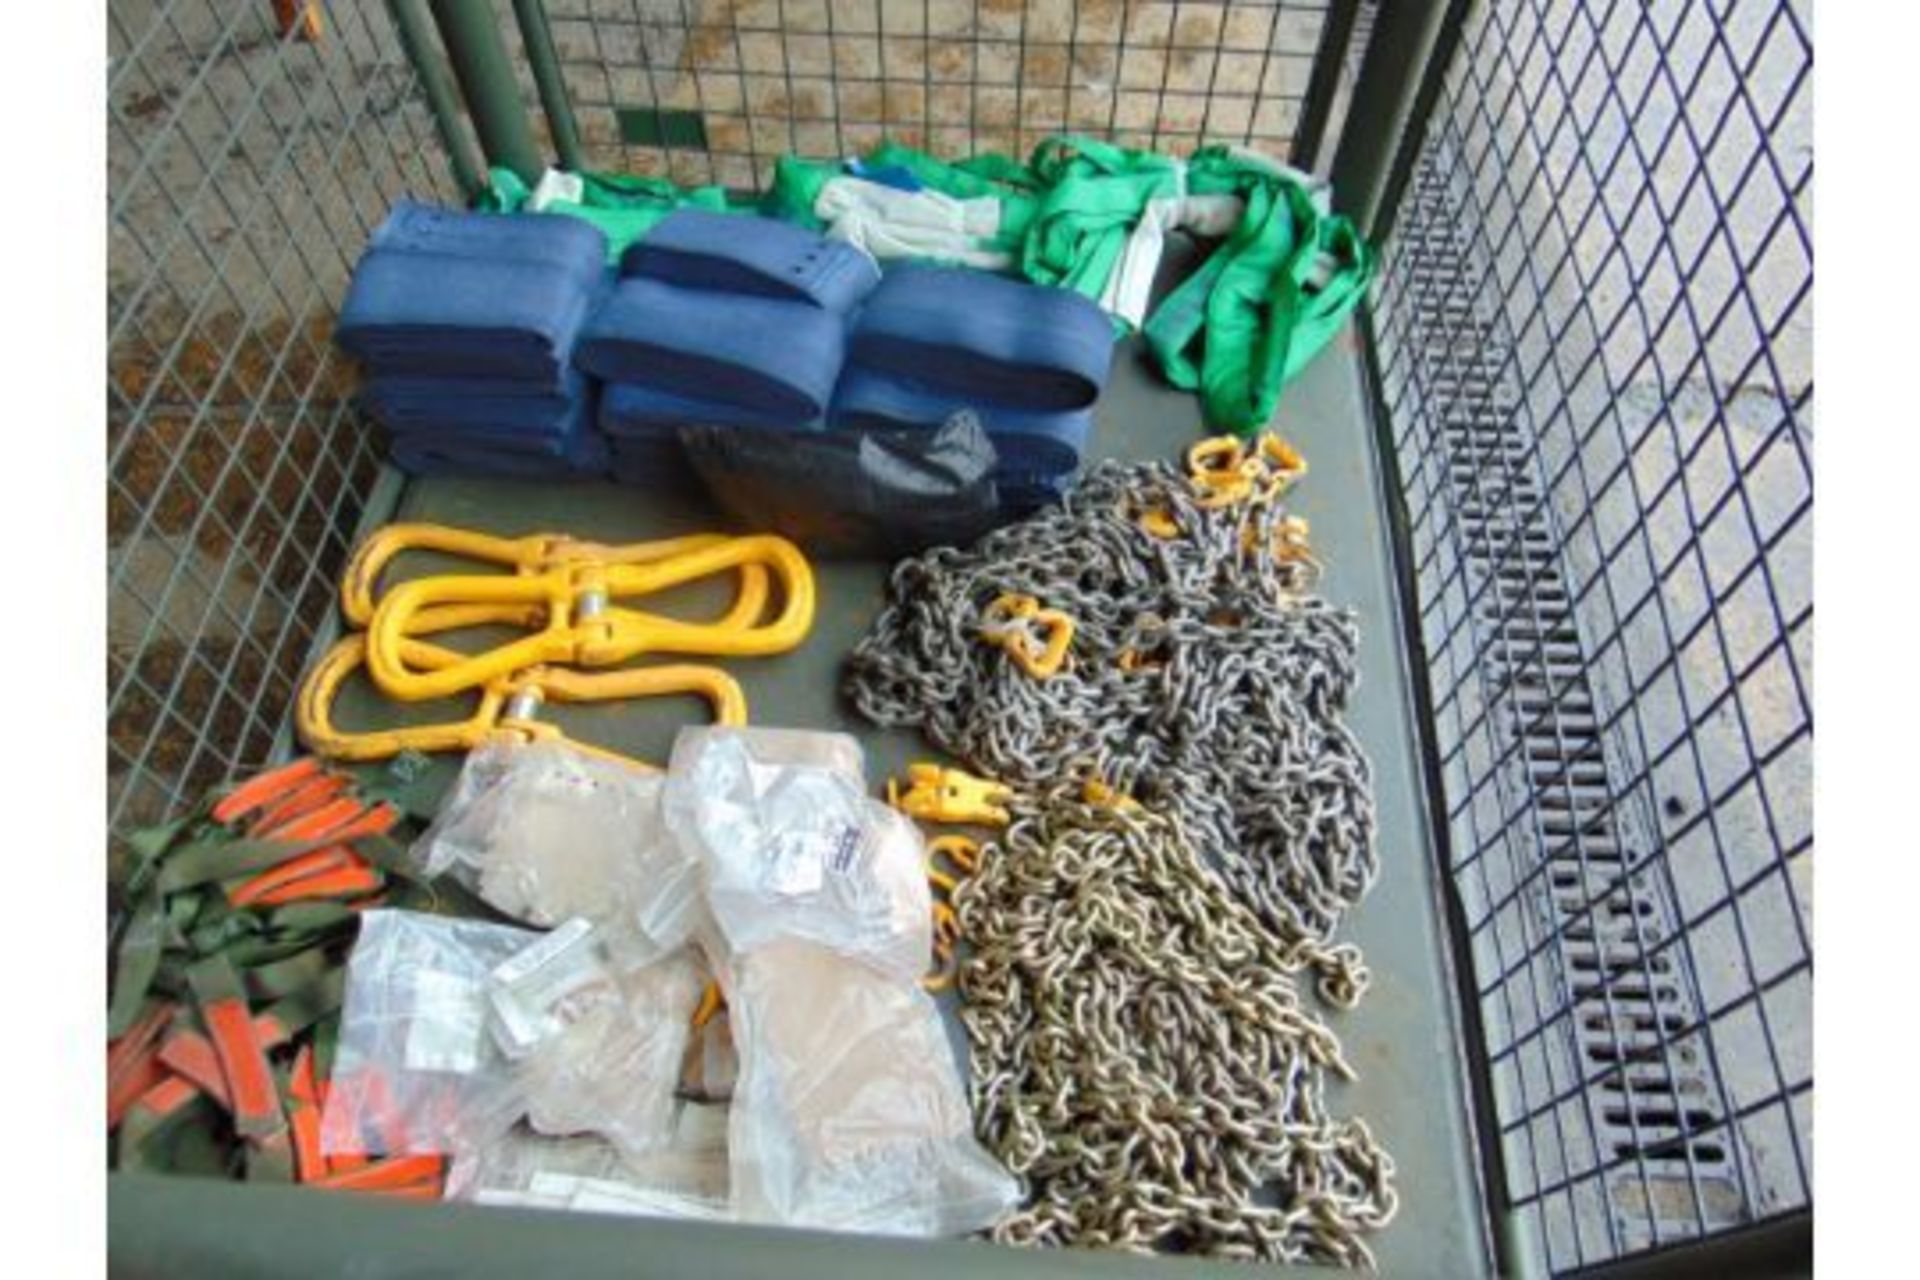 1x Stillage Unissued Lifting Strops, Securing Chains, Straps Fittings etc - Image 4 of 4